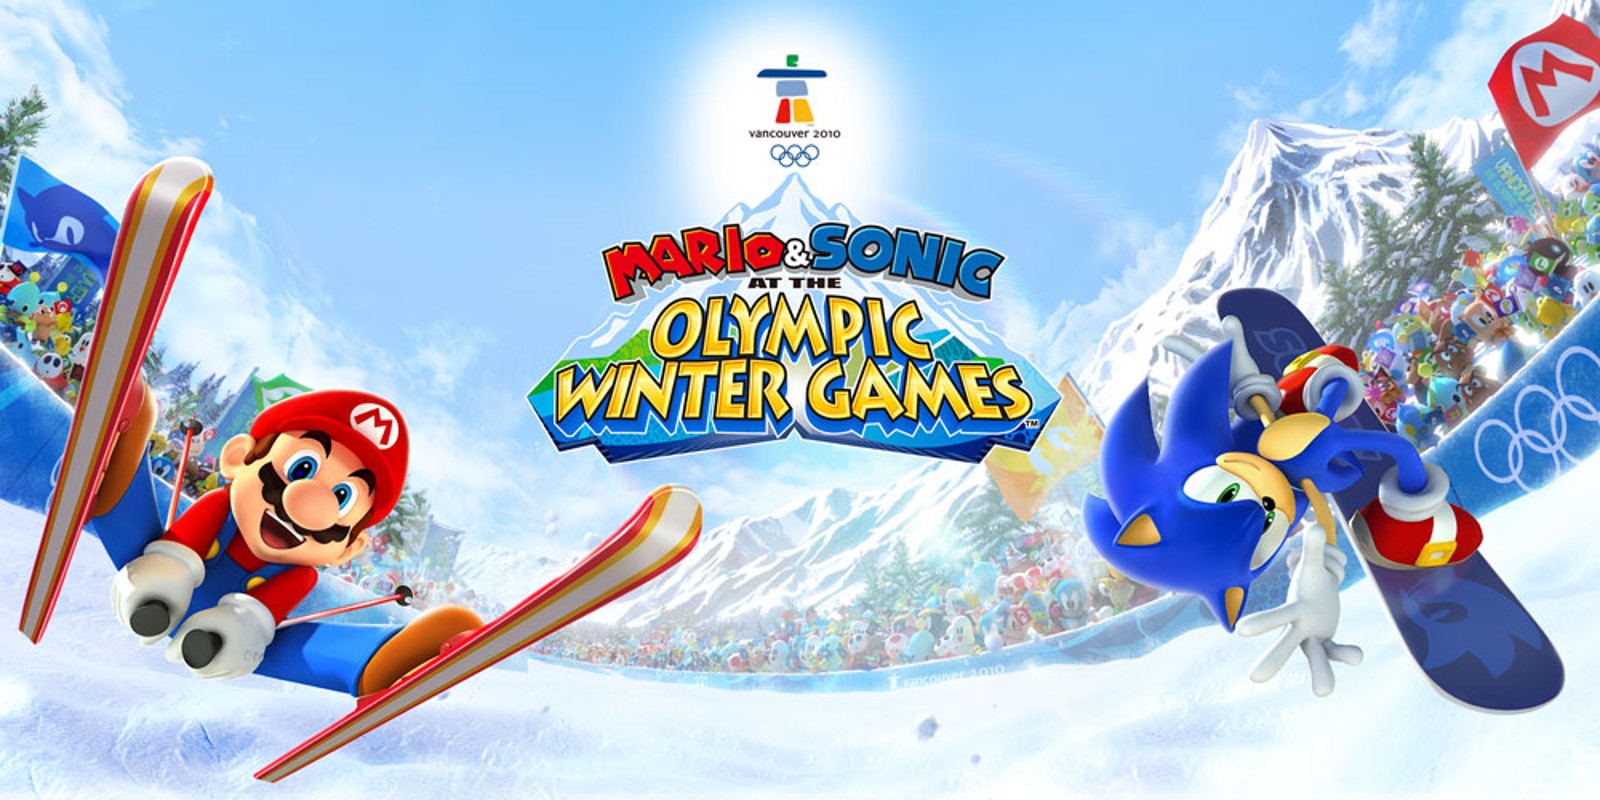 mario-sonic-at-the-olympic-winter-games-nintendo-ds-games-nintendo